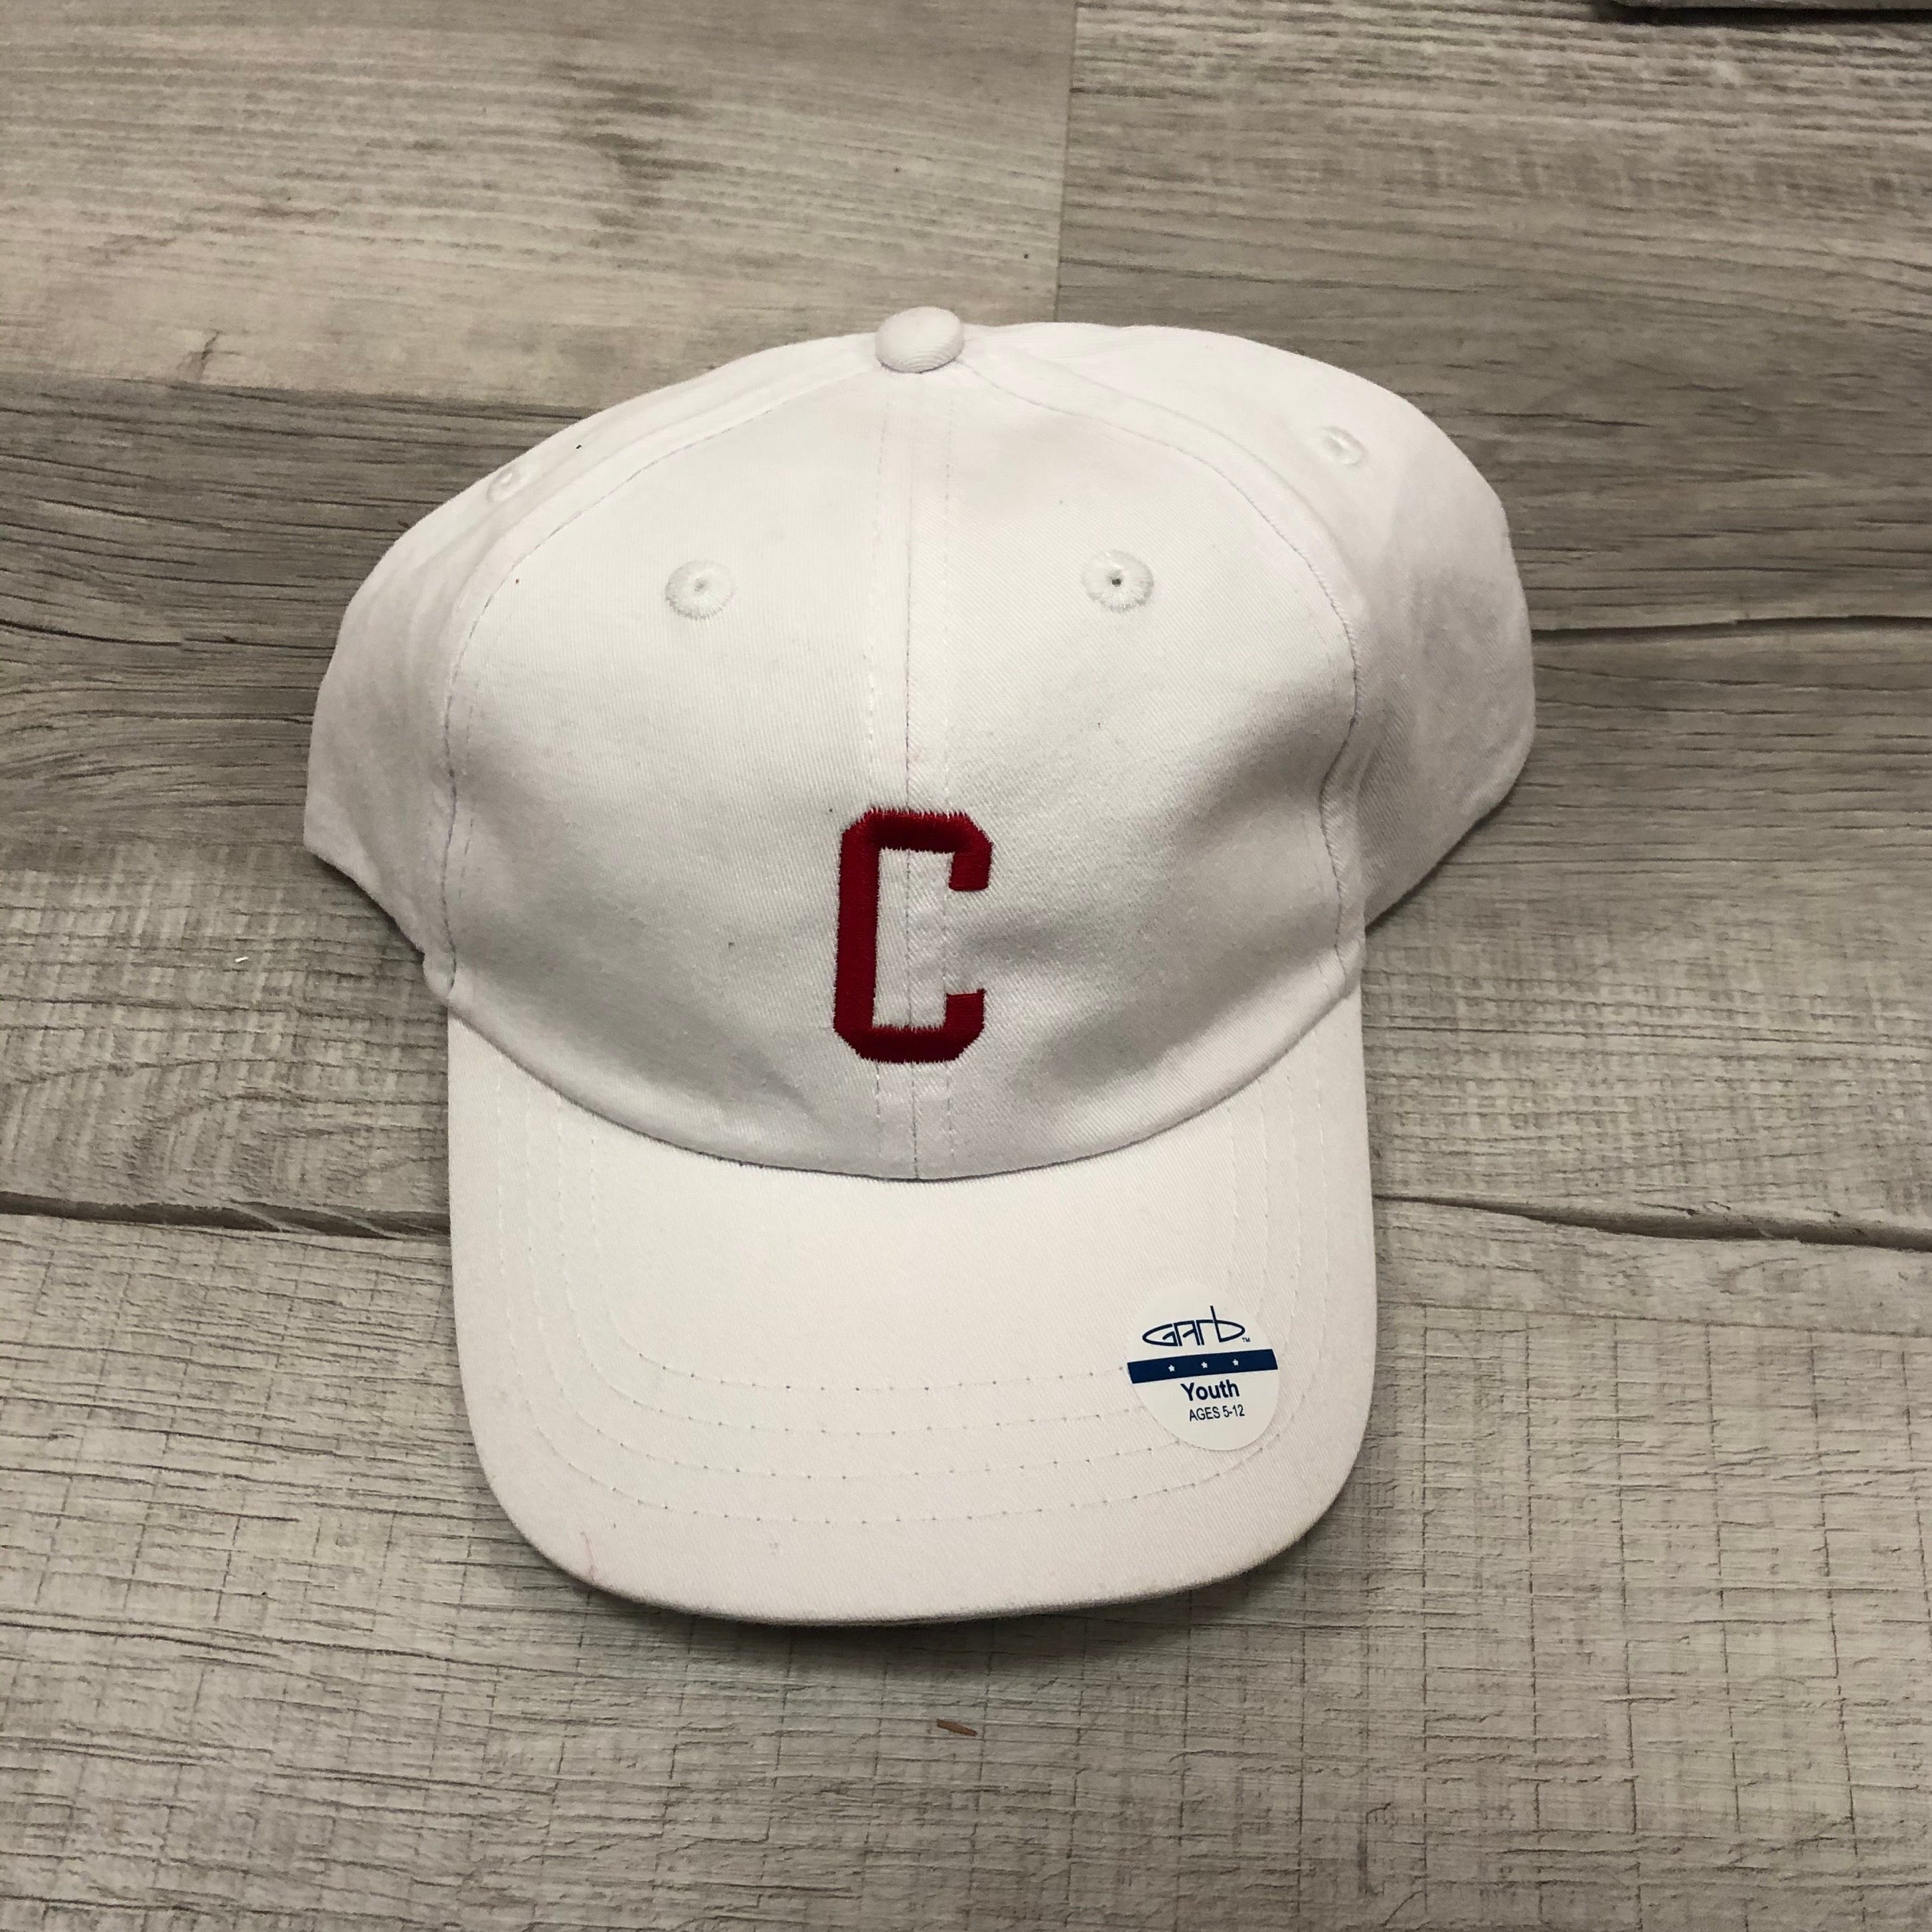 Garb Youth Hat with "C"